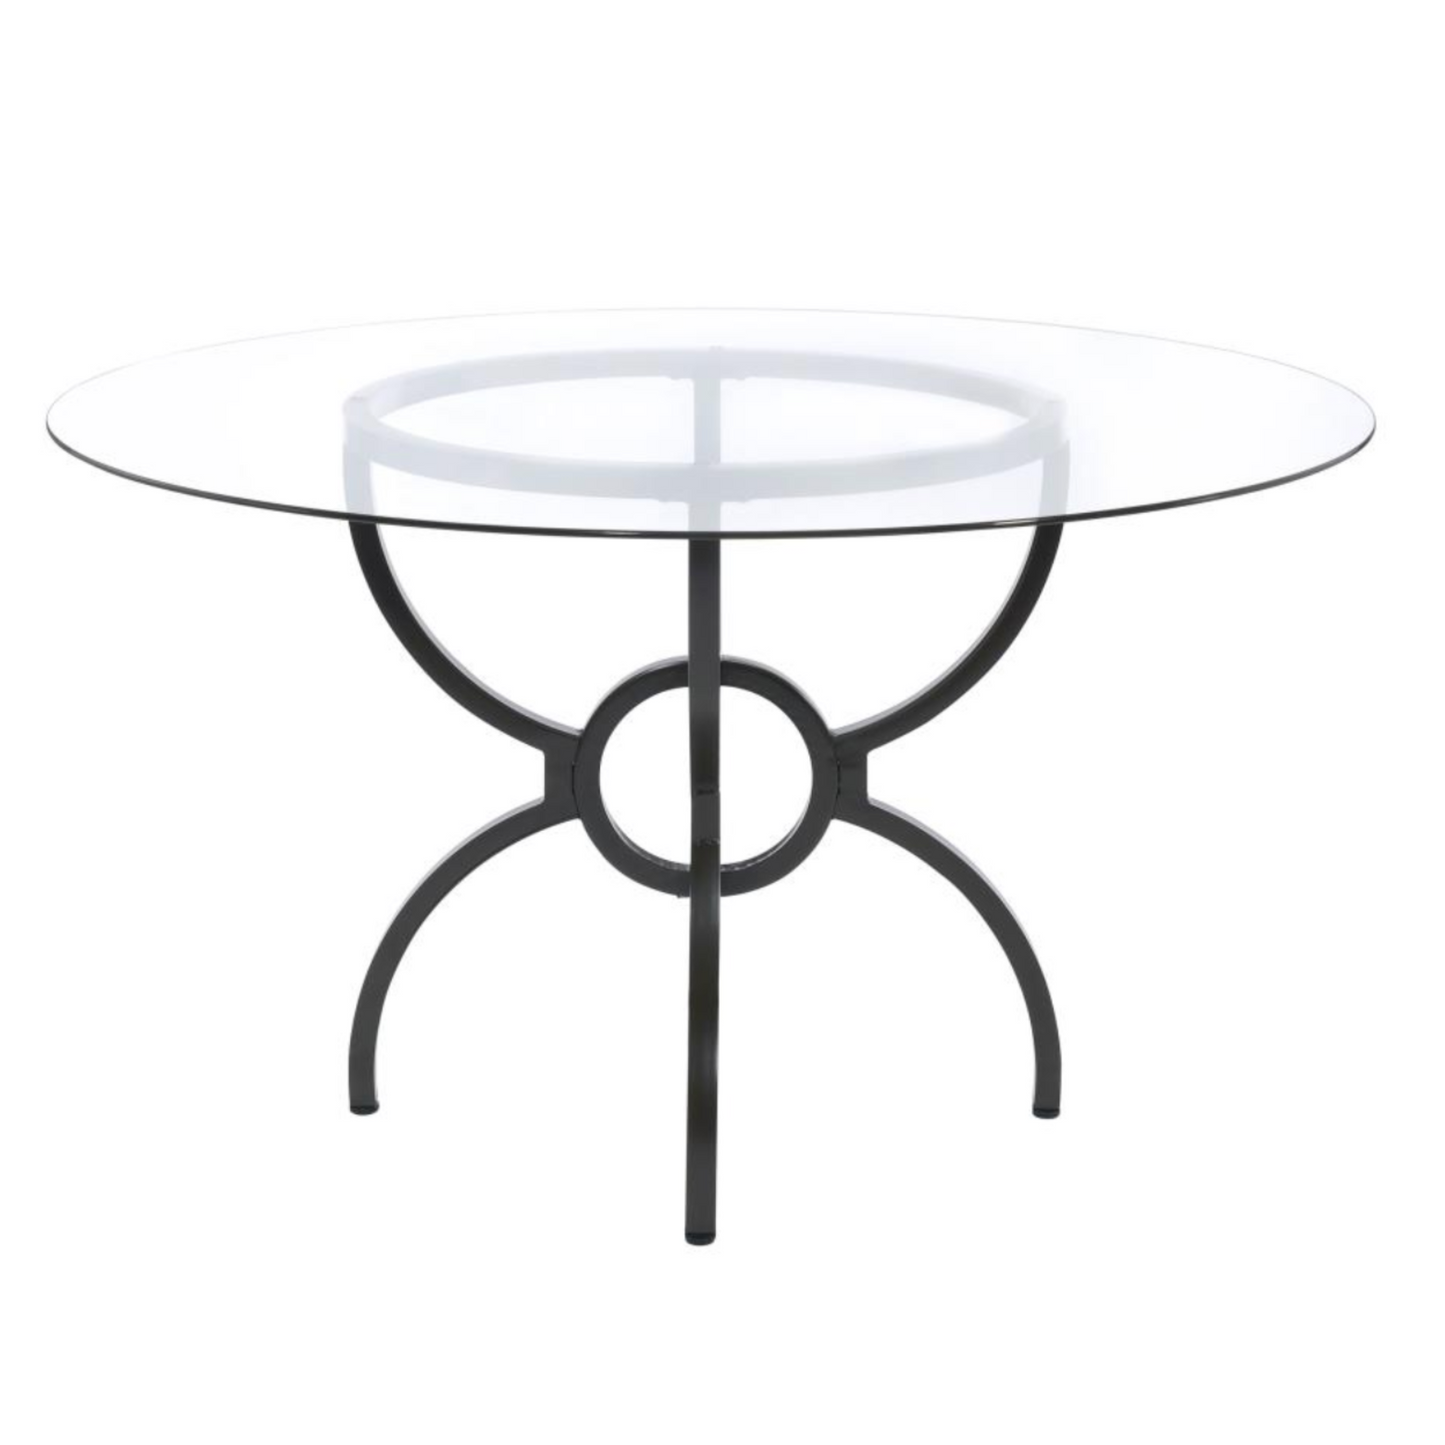 AVIANO 48" Round Glass Top Dining Table